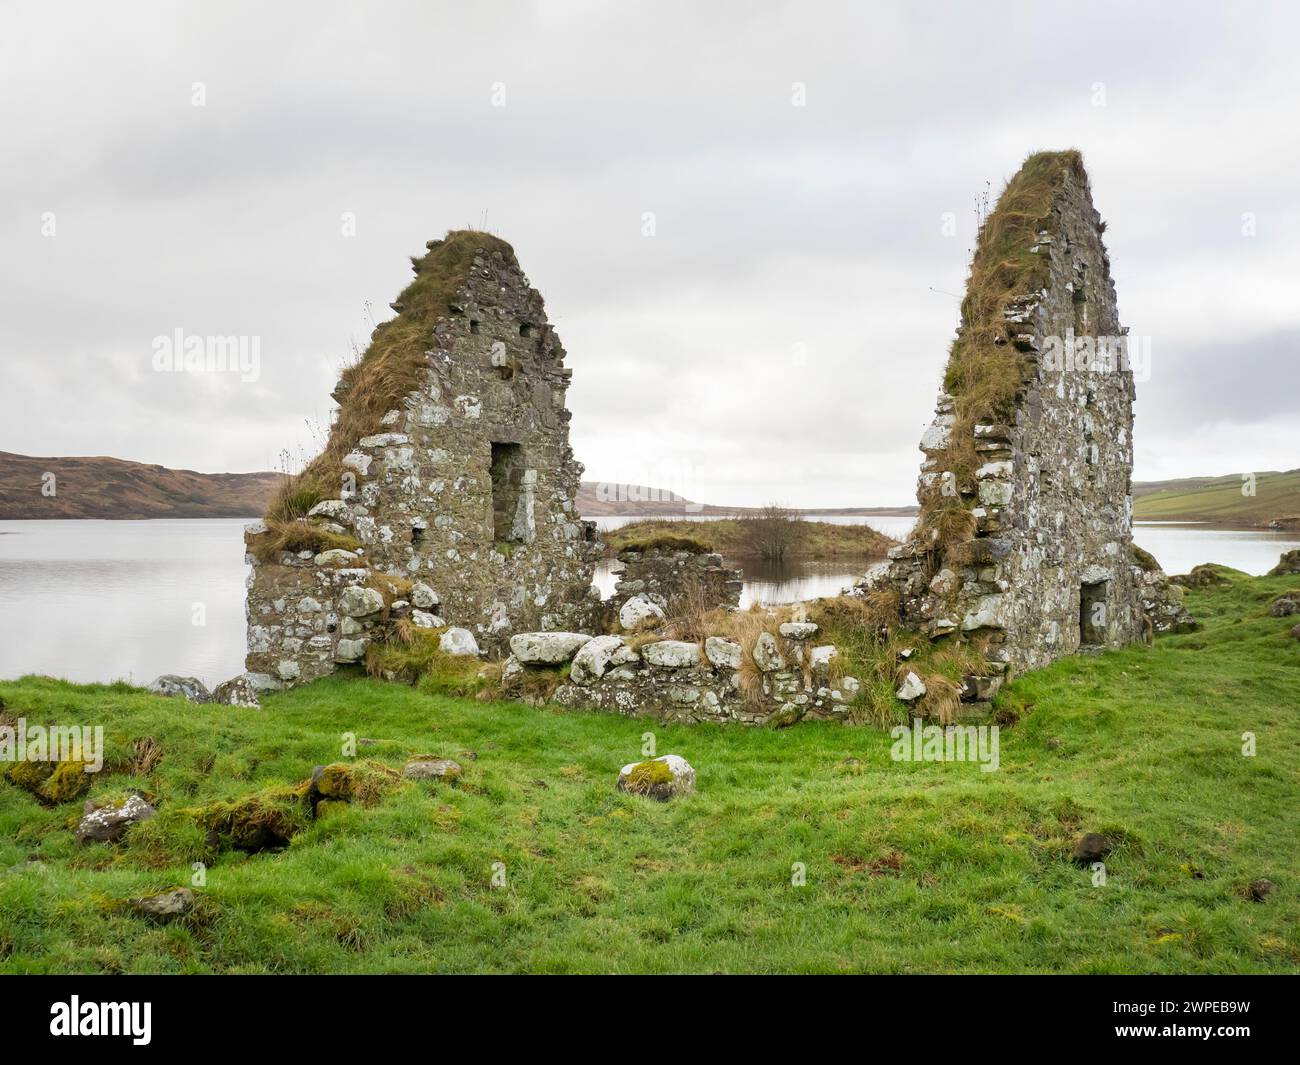 Ancient building remains at Loch Finlaggan on the island that was the seat of the Lords of the Isles, Islay, Scotland, UK. Stock Photo